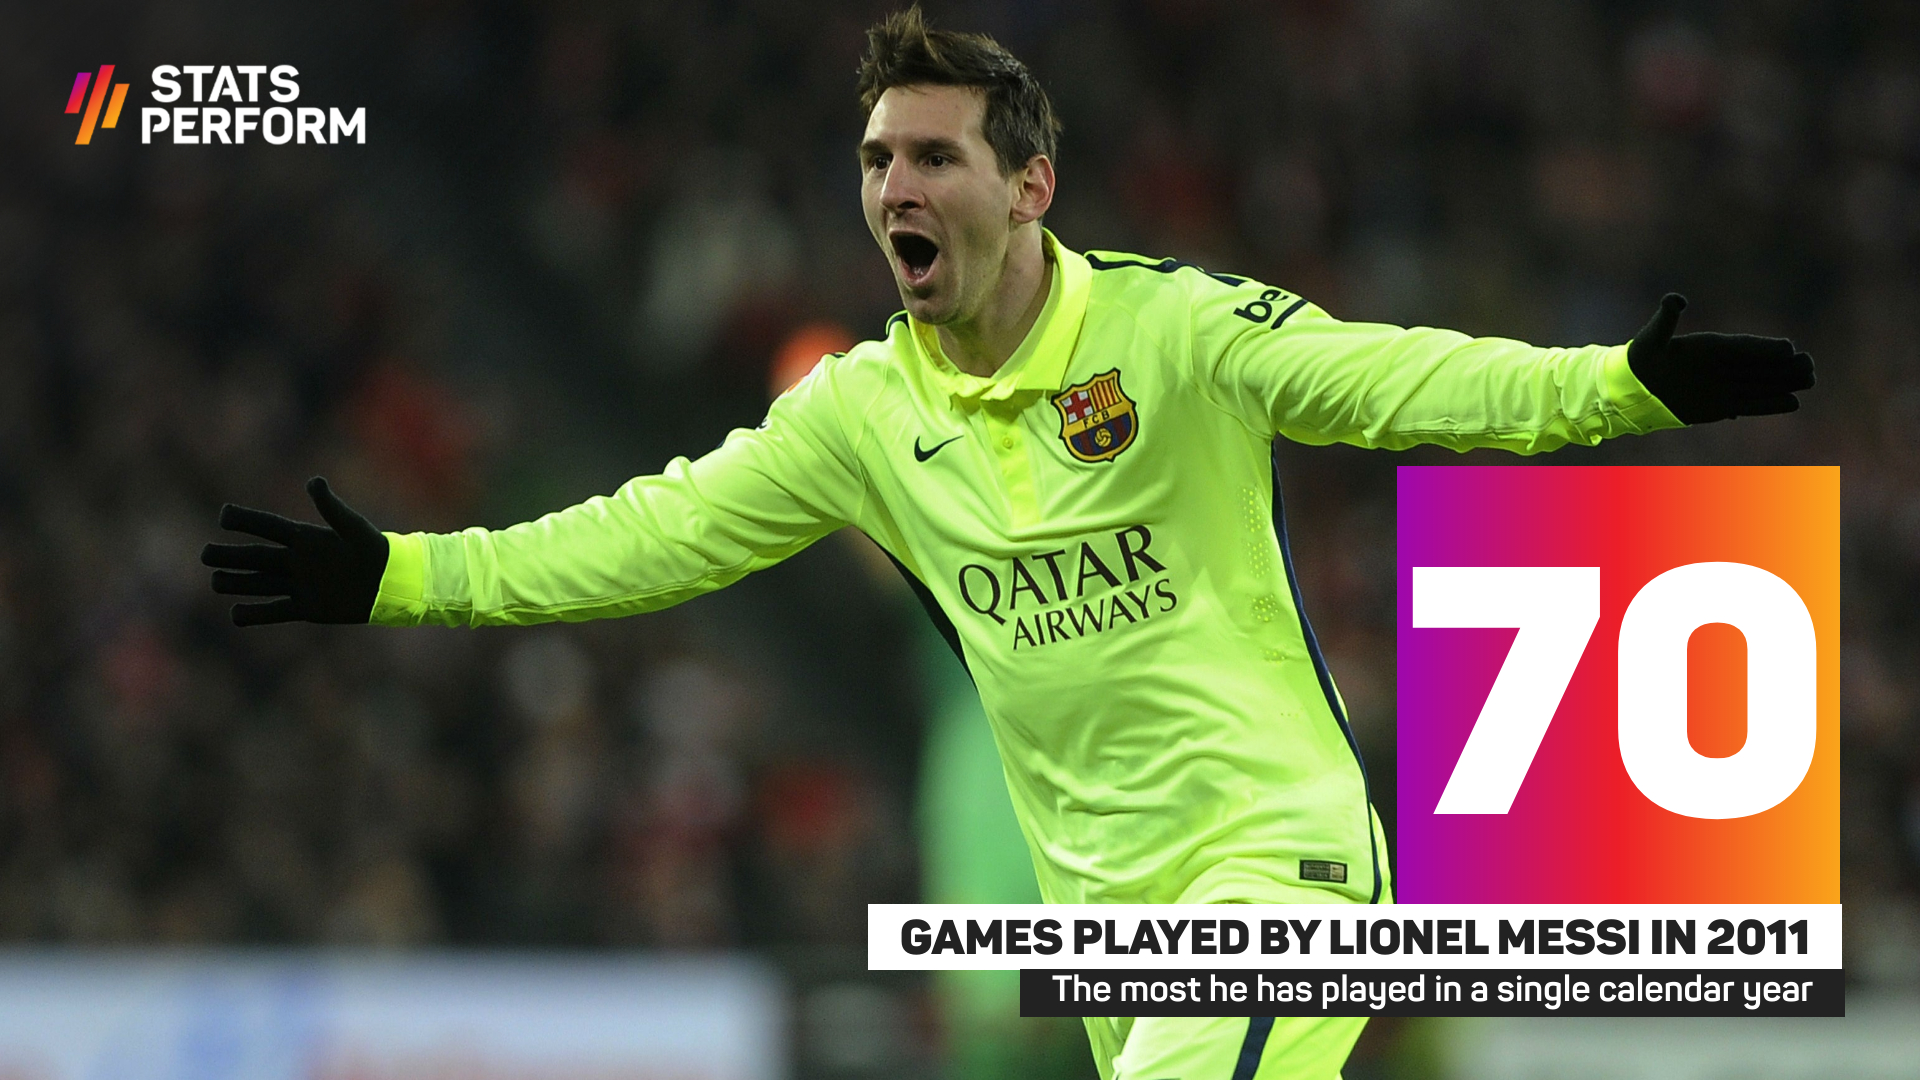 Lionel Messi played 70 games in 2011